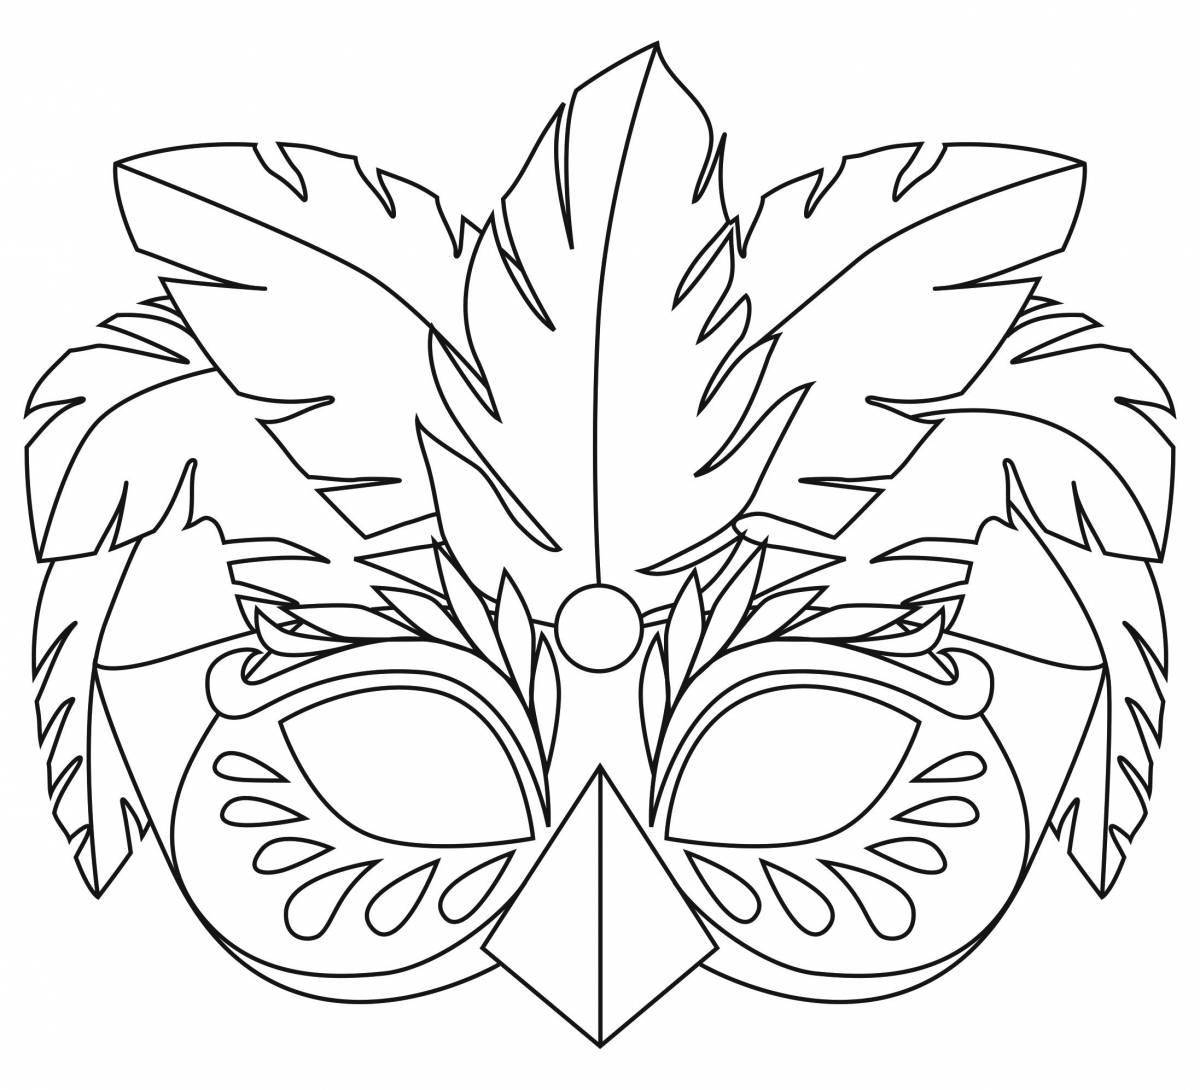 Adorable carnival mask coloring book